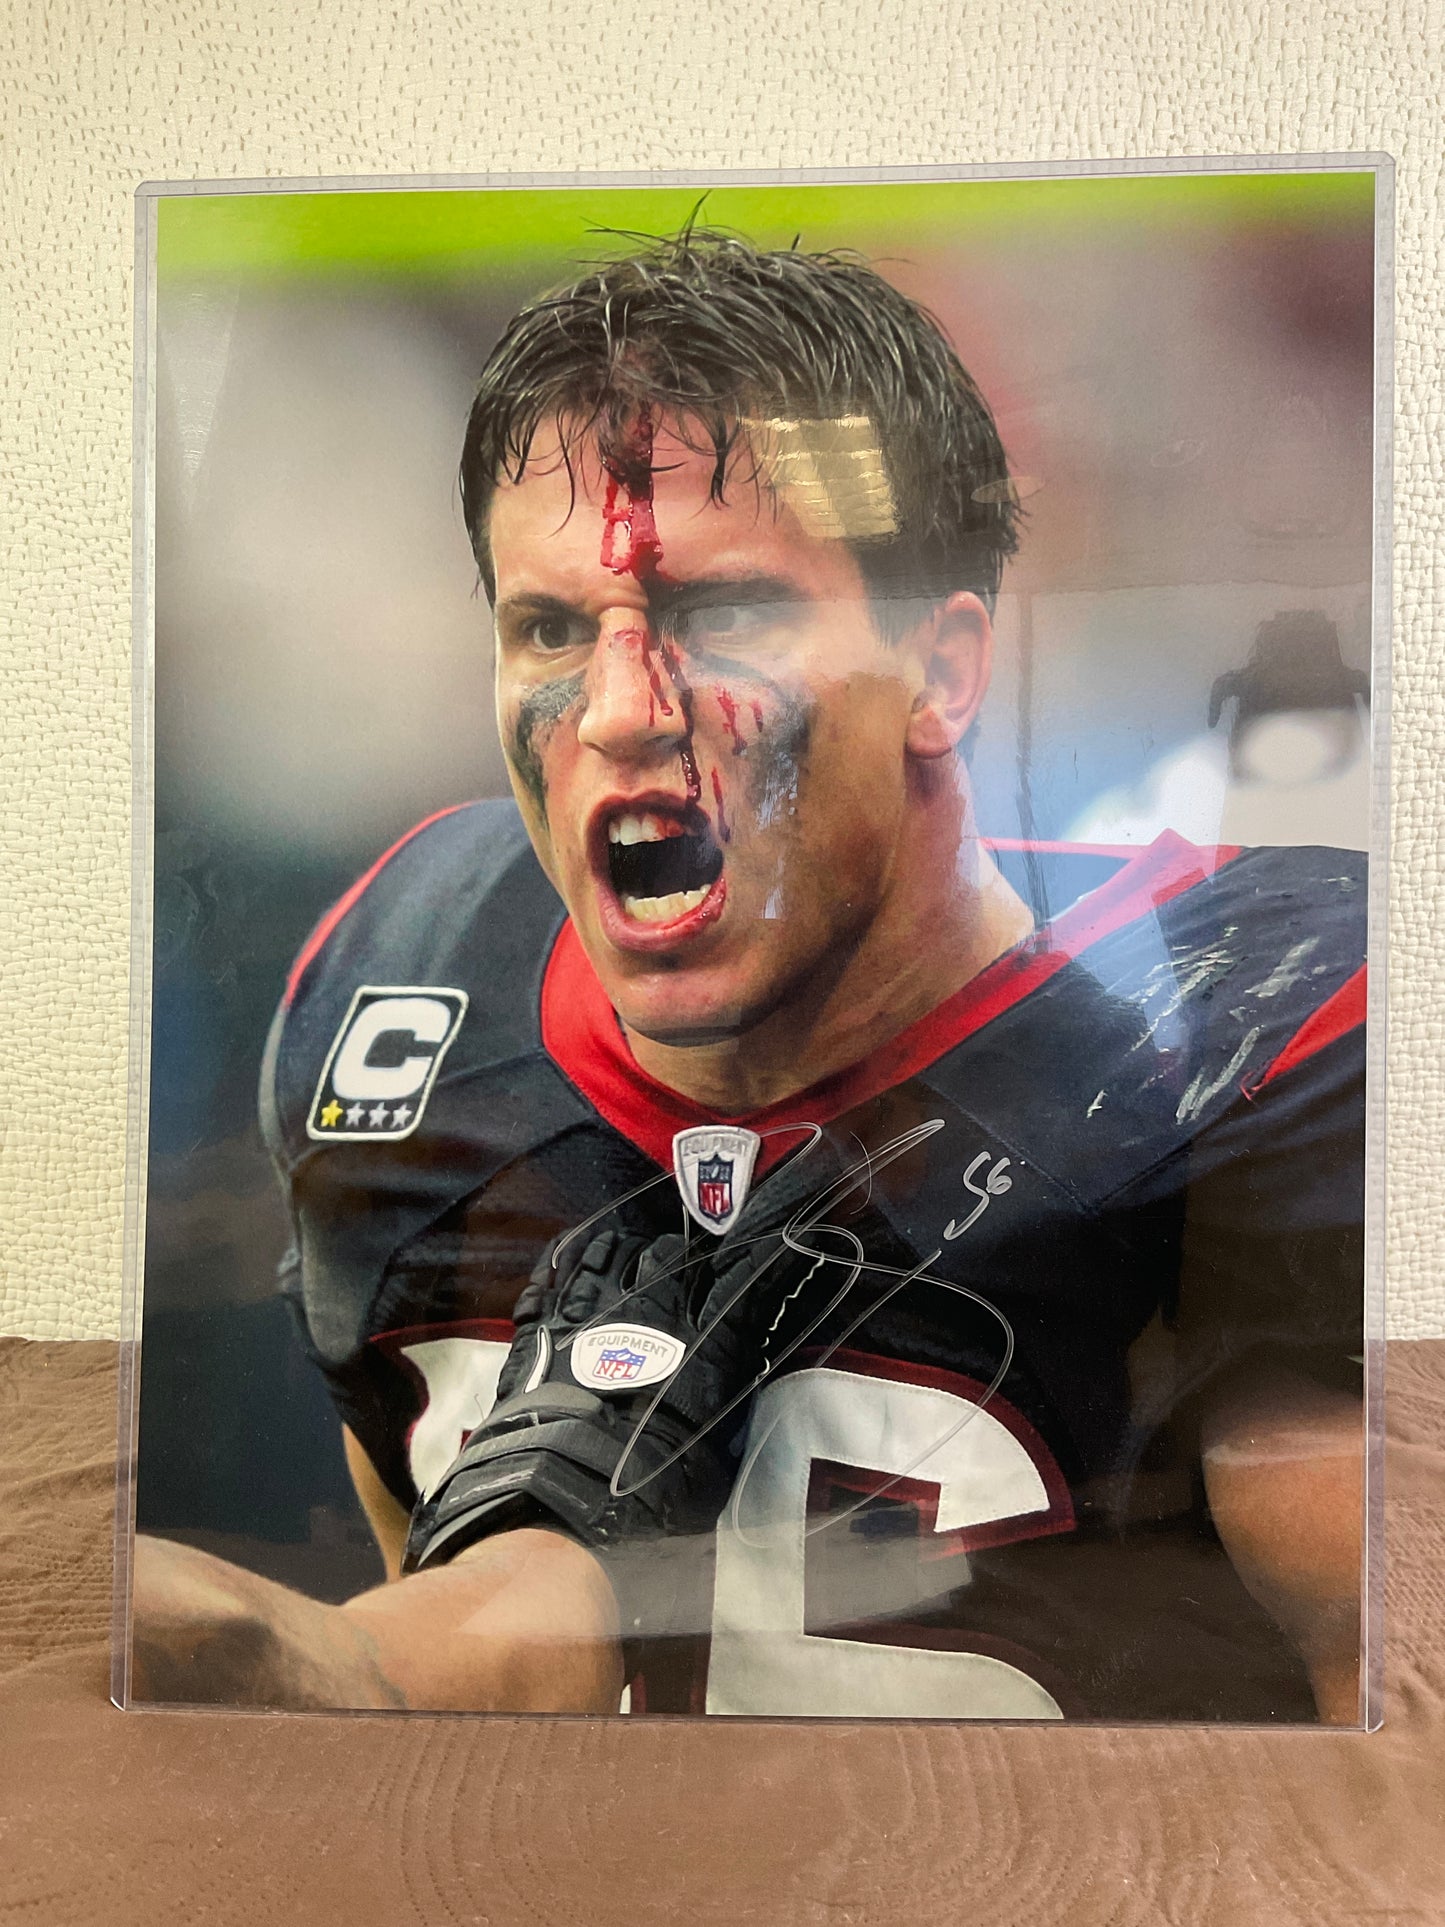 Texans Brian Cushing #56 Autographed Photos, Sold Separately